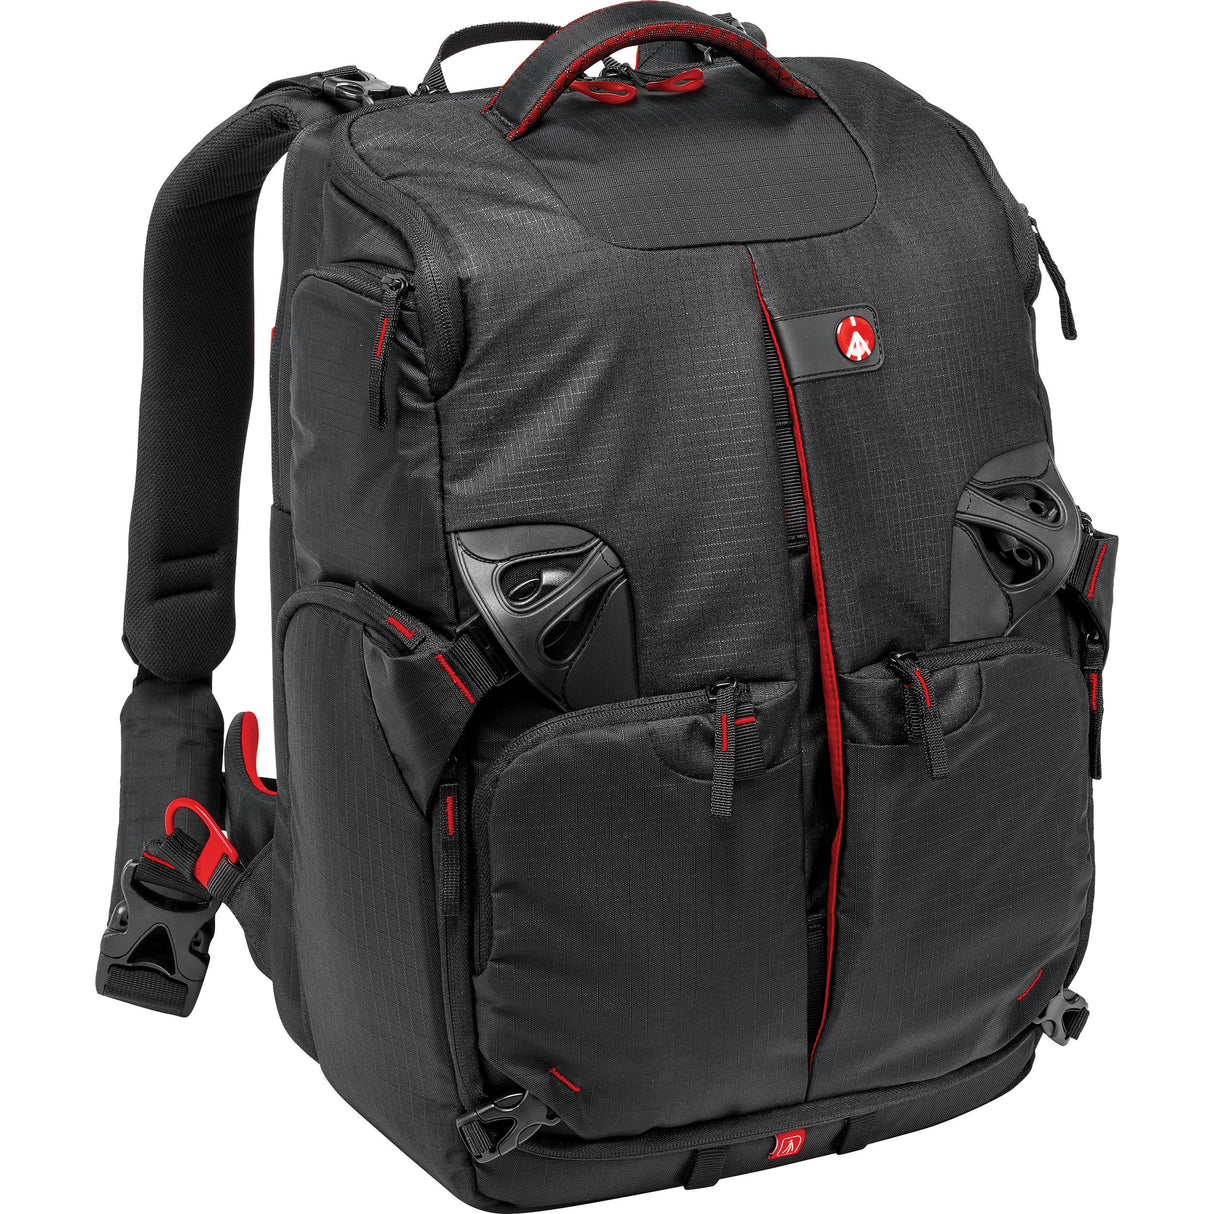 Manfrotto Pro Light 3N1-35 Camera Backpack (Black)